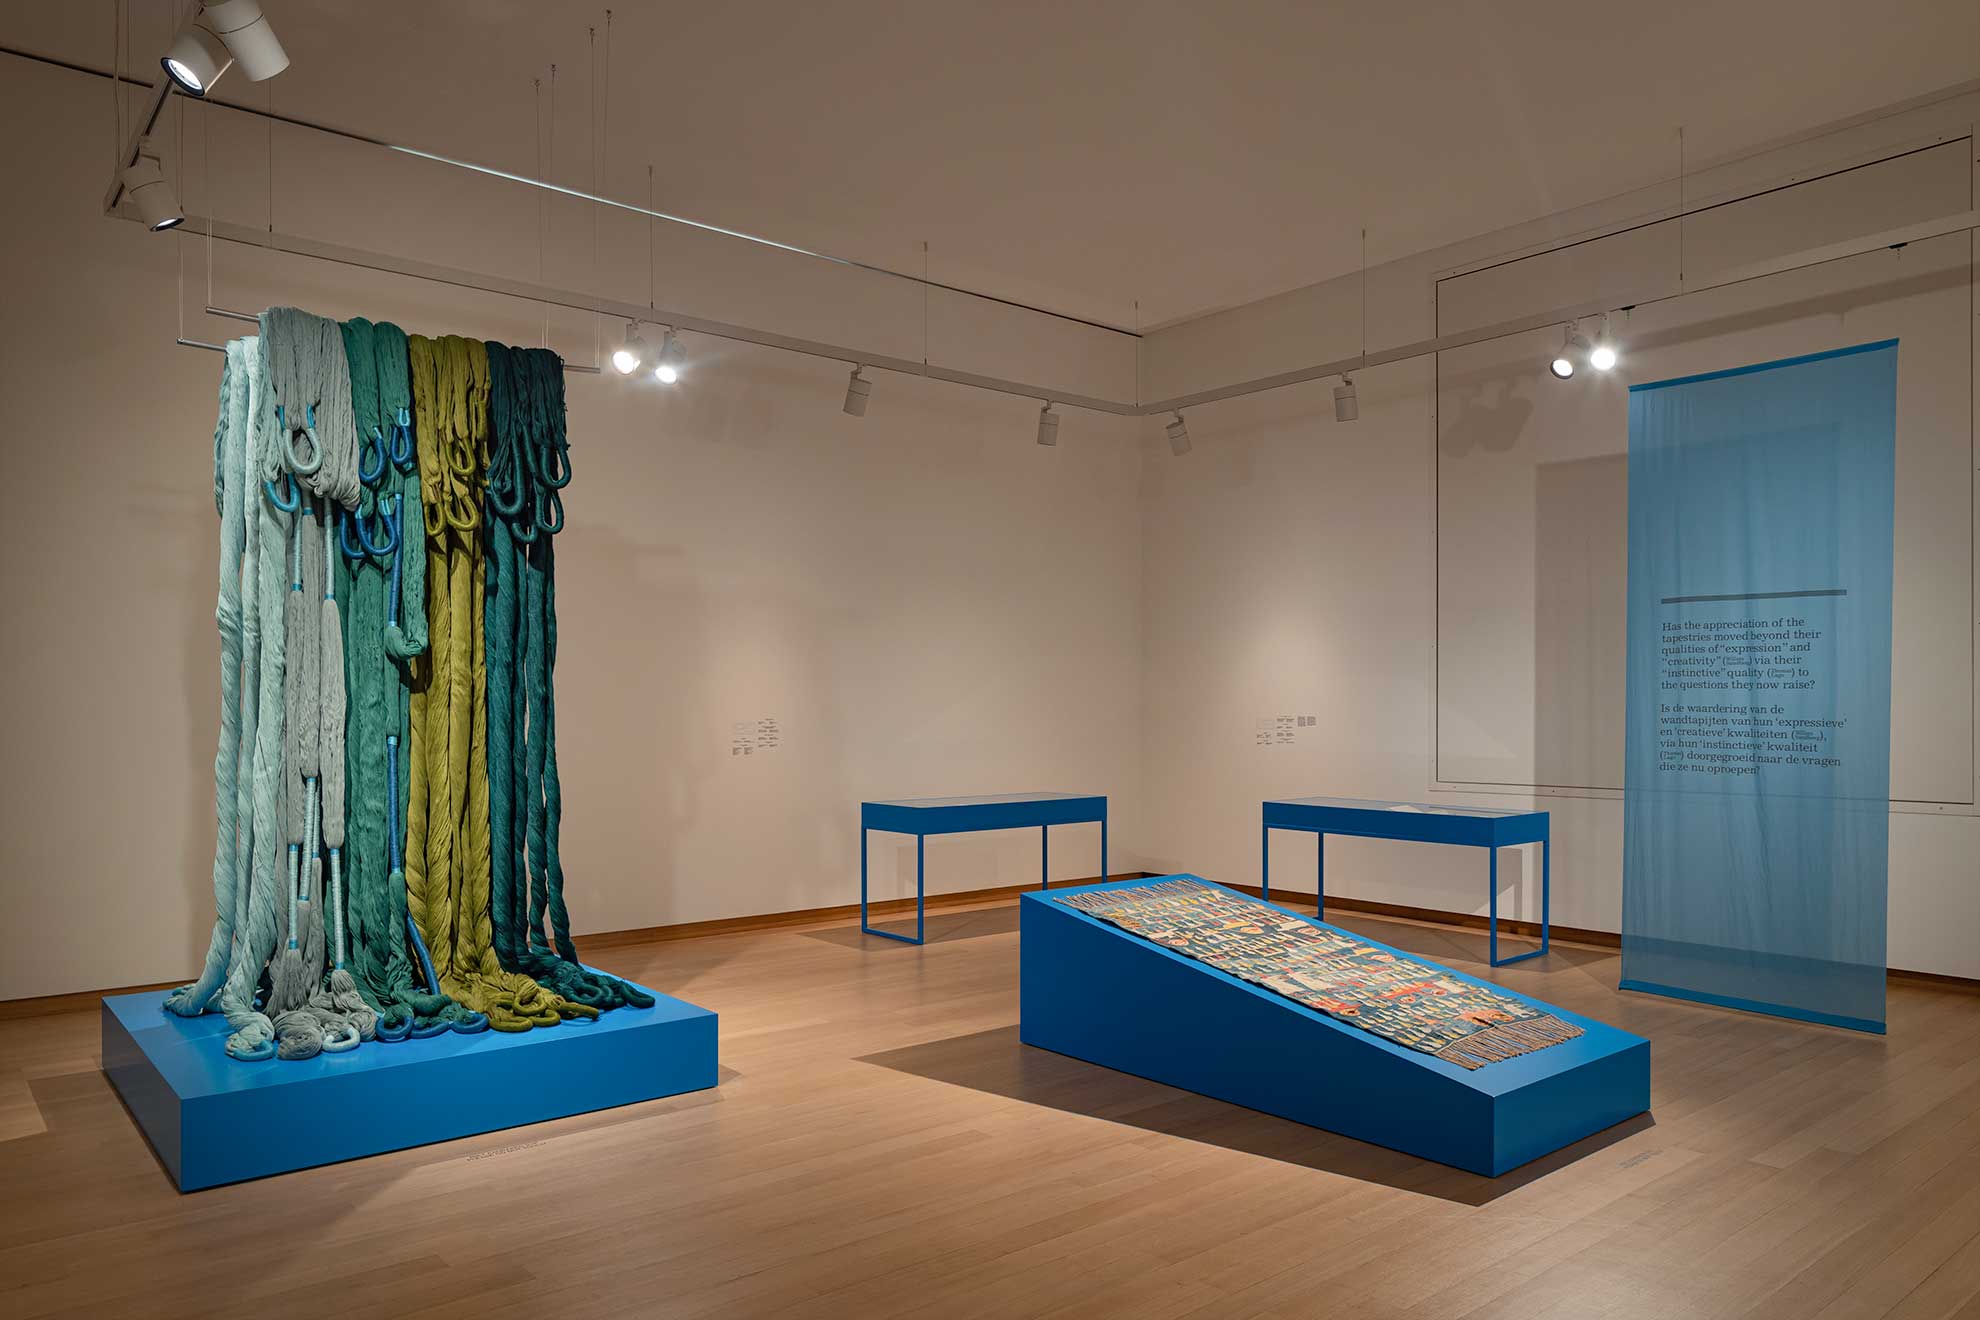 How Textiles Talk and What They Have to Say. A Curatorial Introduction to the Exhibition Let Textiles Talk by Amanda Pinatih.